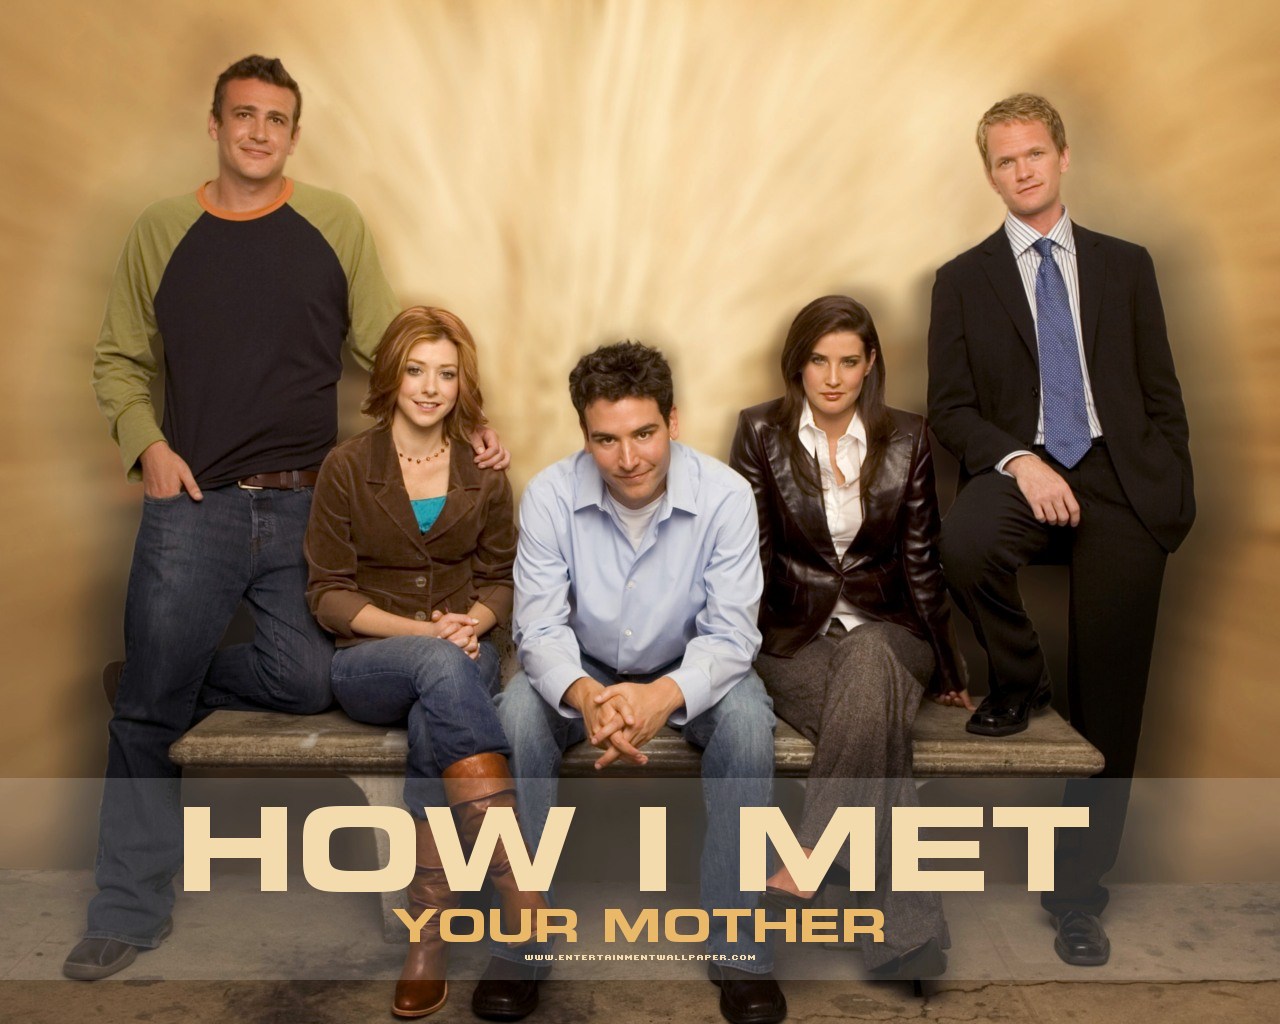 how i met your mother wallpaper,people,social group,television program,photo caption,movie